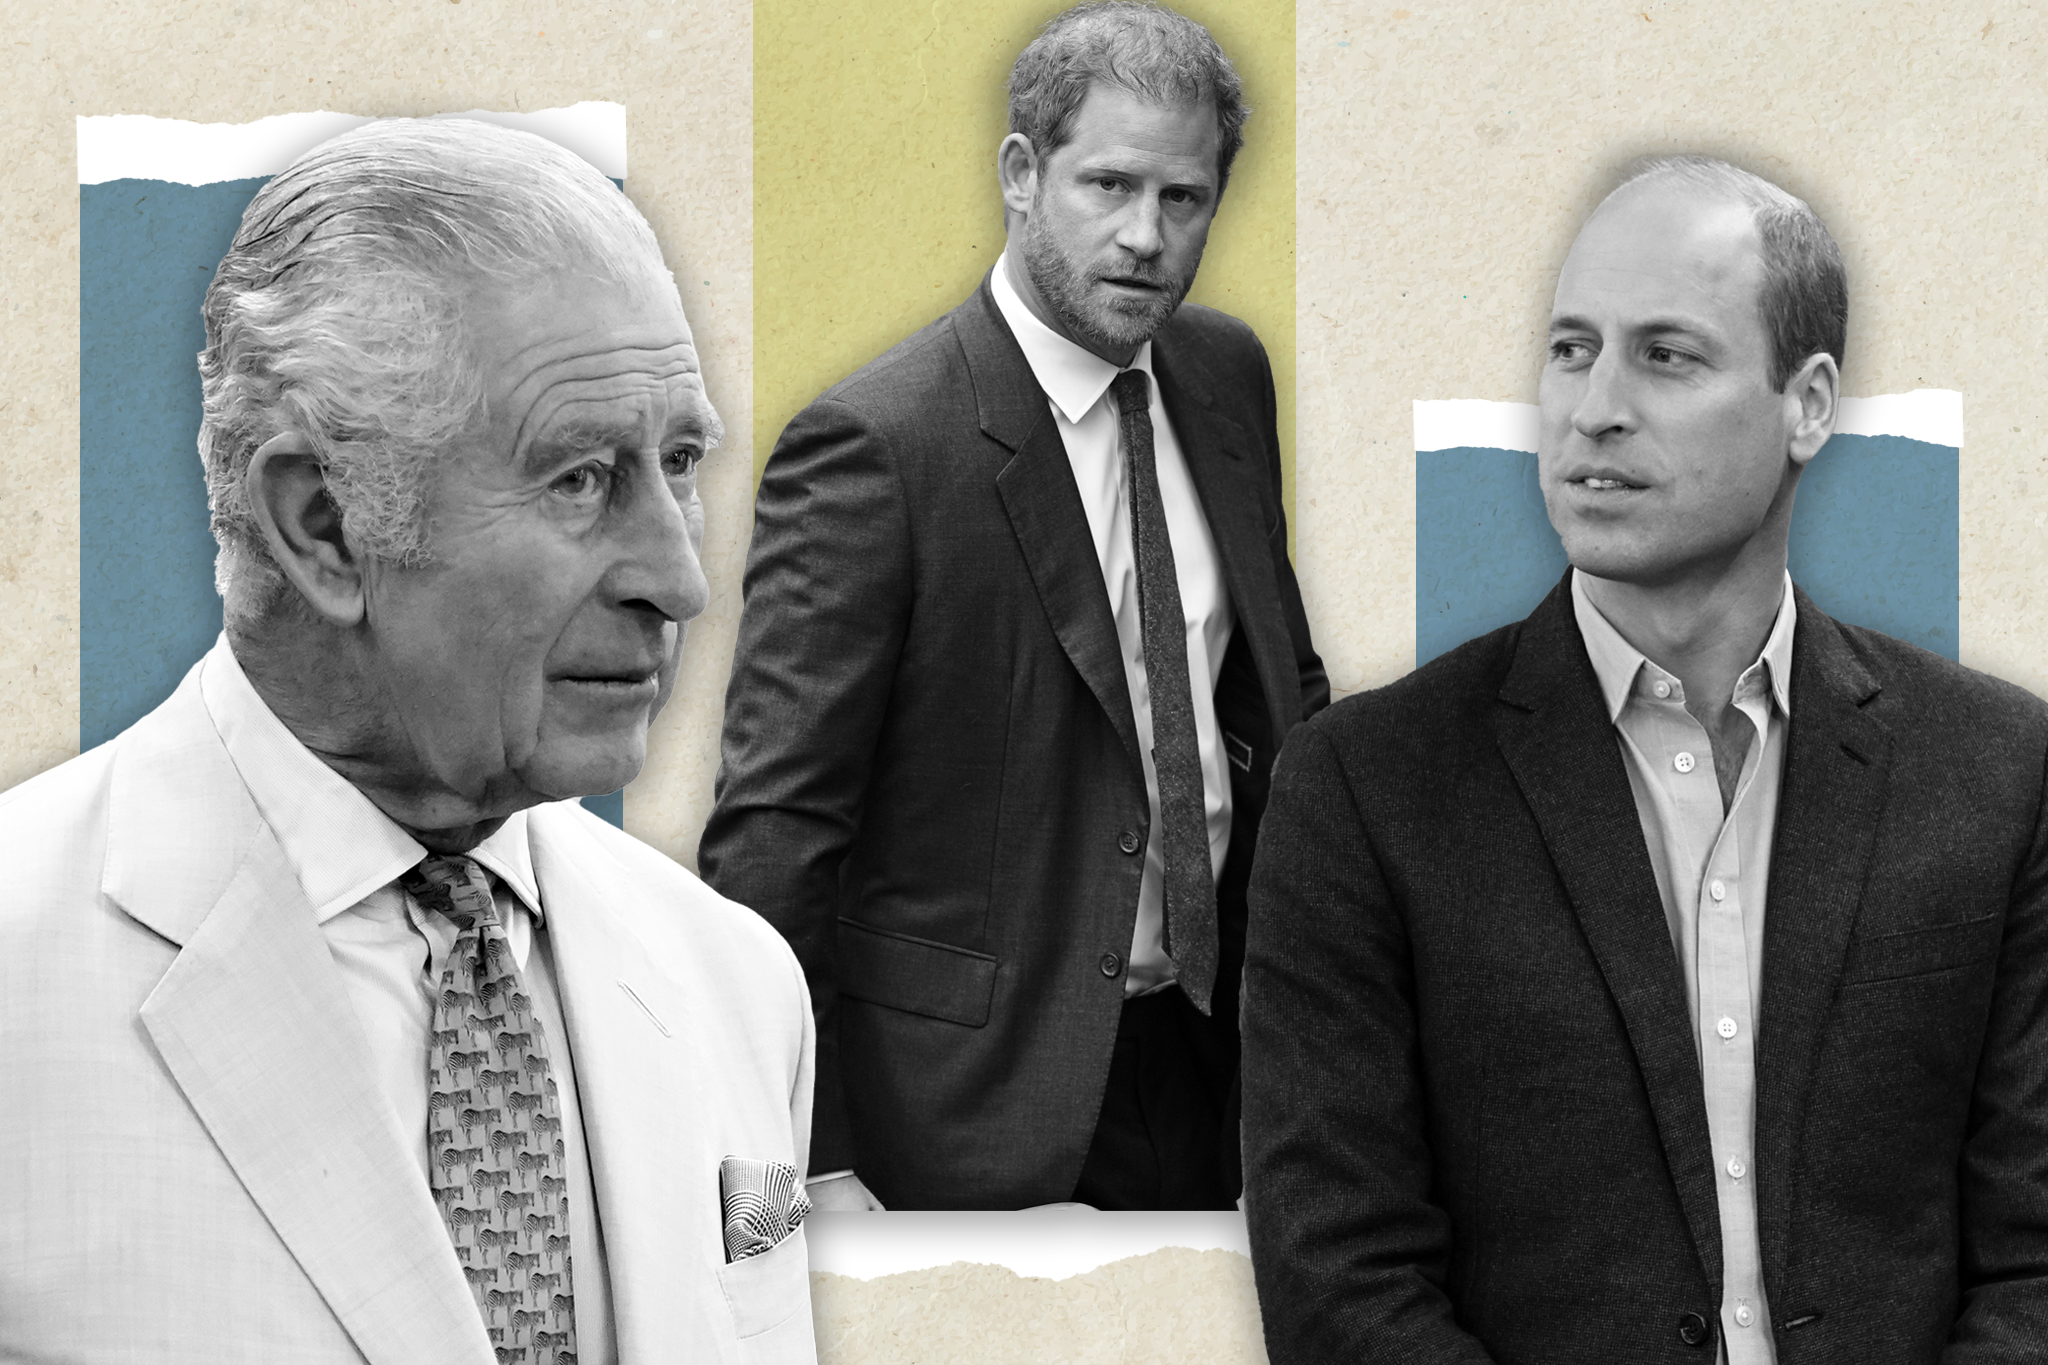 The chasm between the royal family and Harry’s own cohort is a reminder that there are now two competing visions of royalty